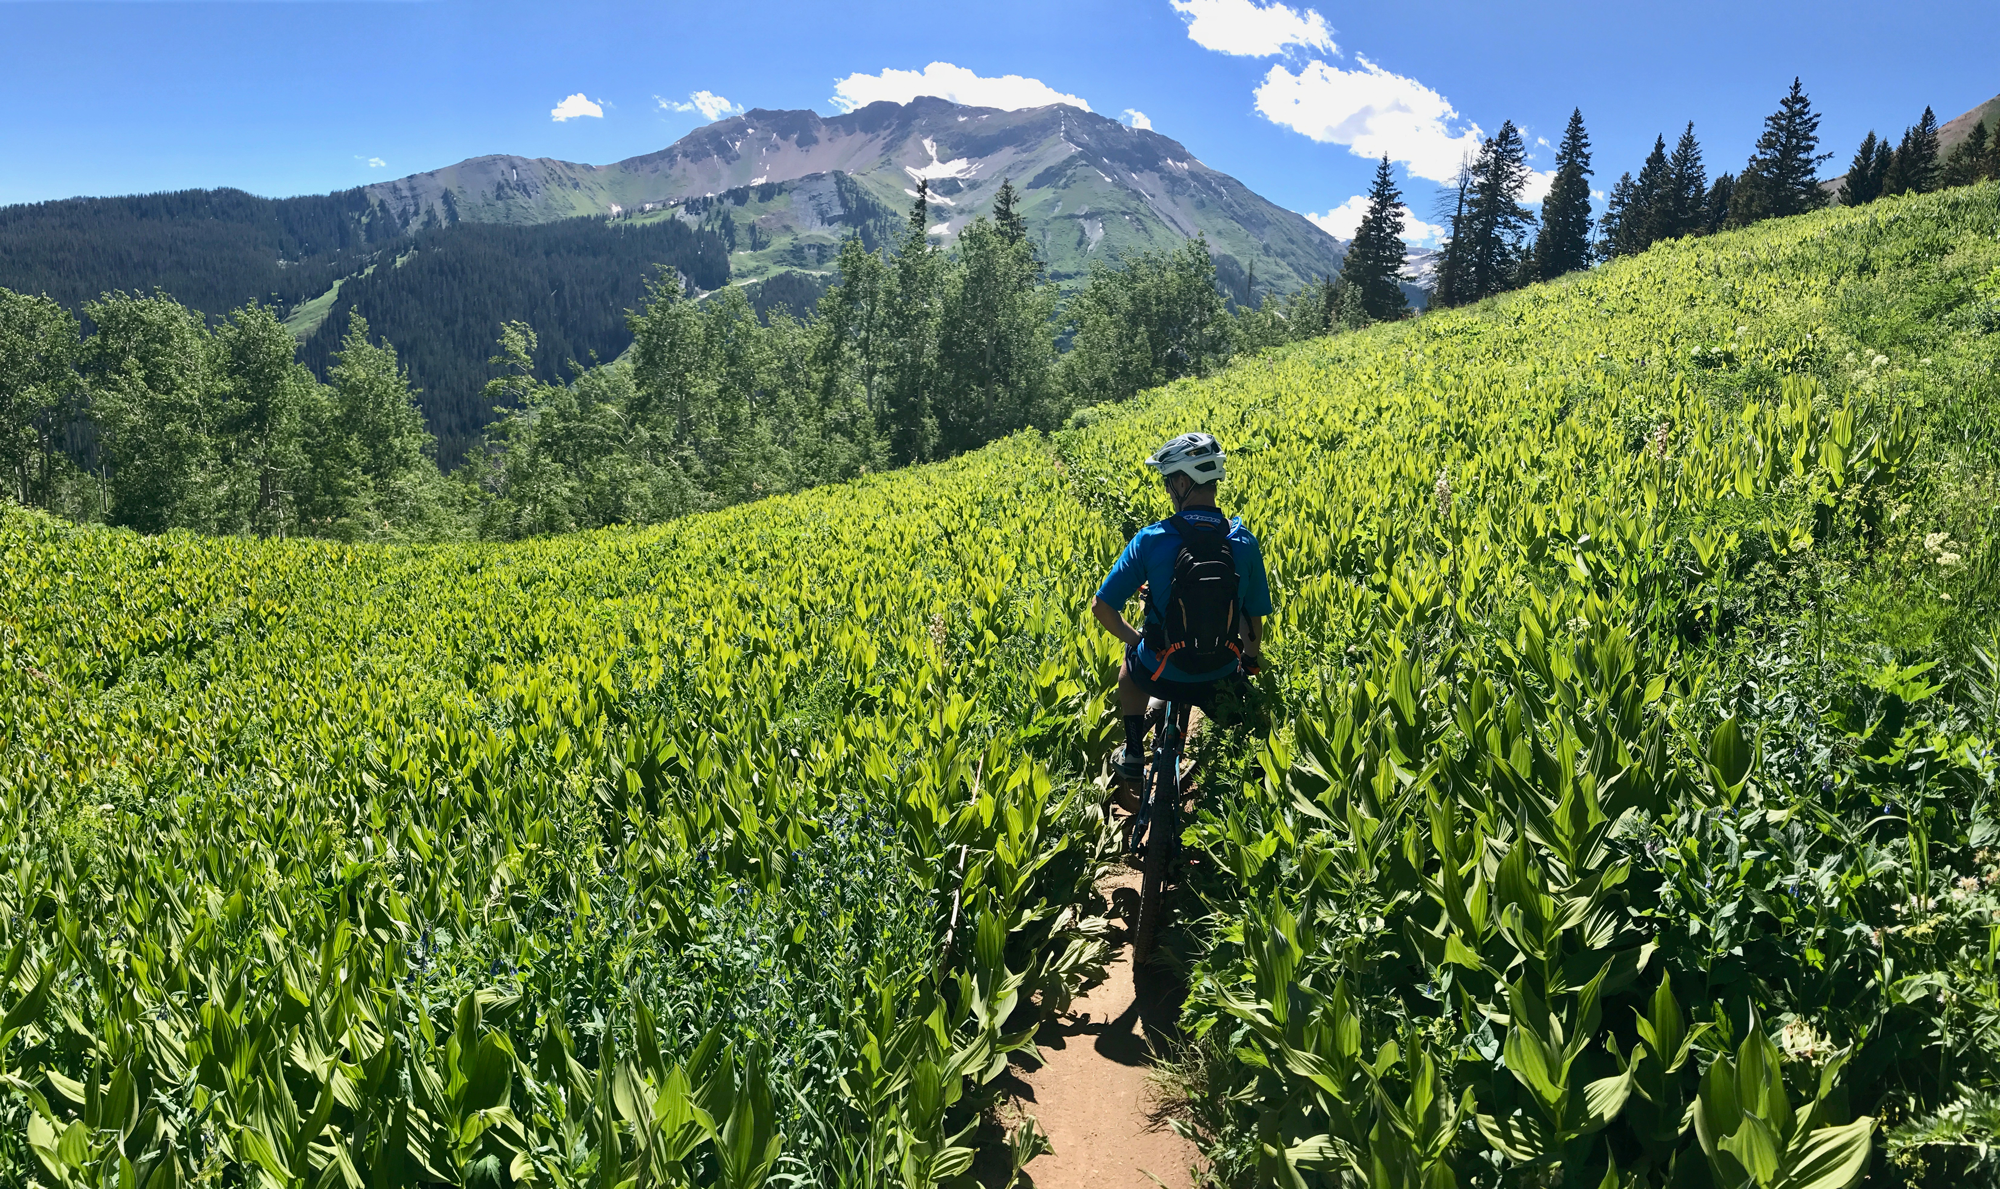 Riding Crested Butte trail with mountain views